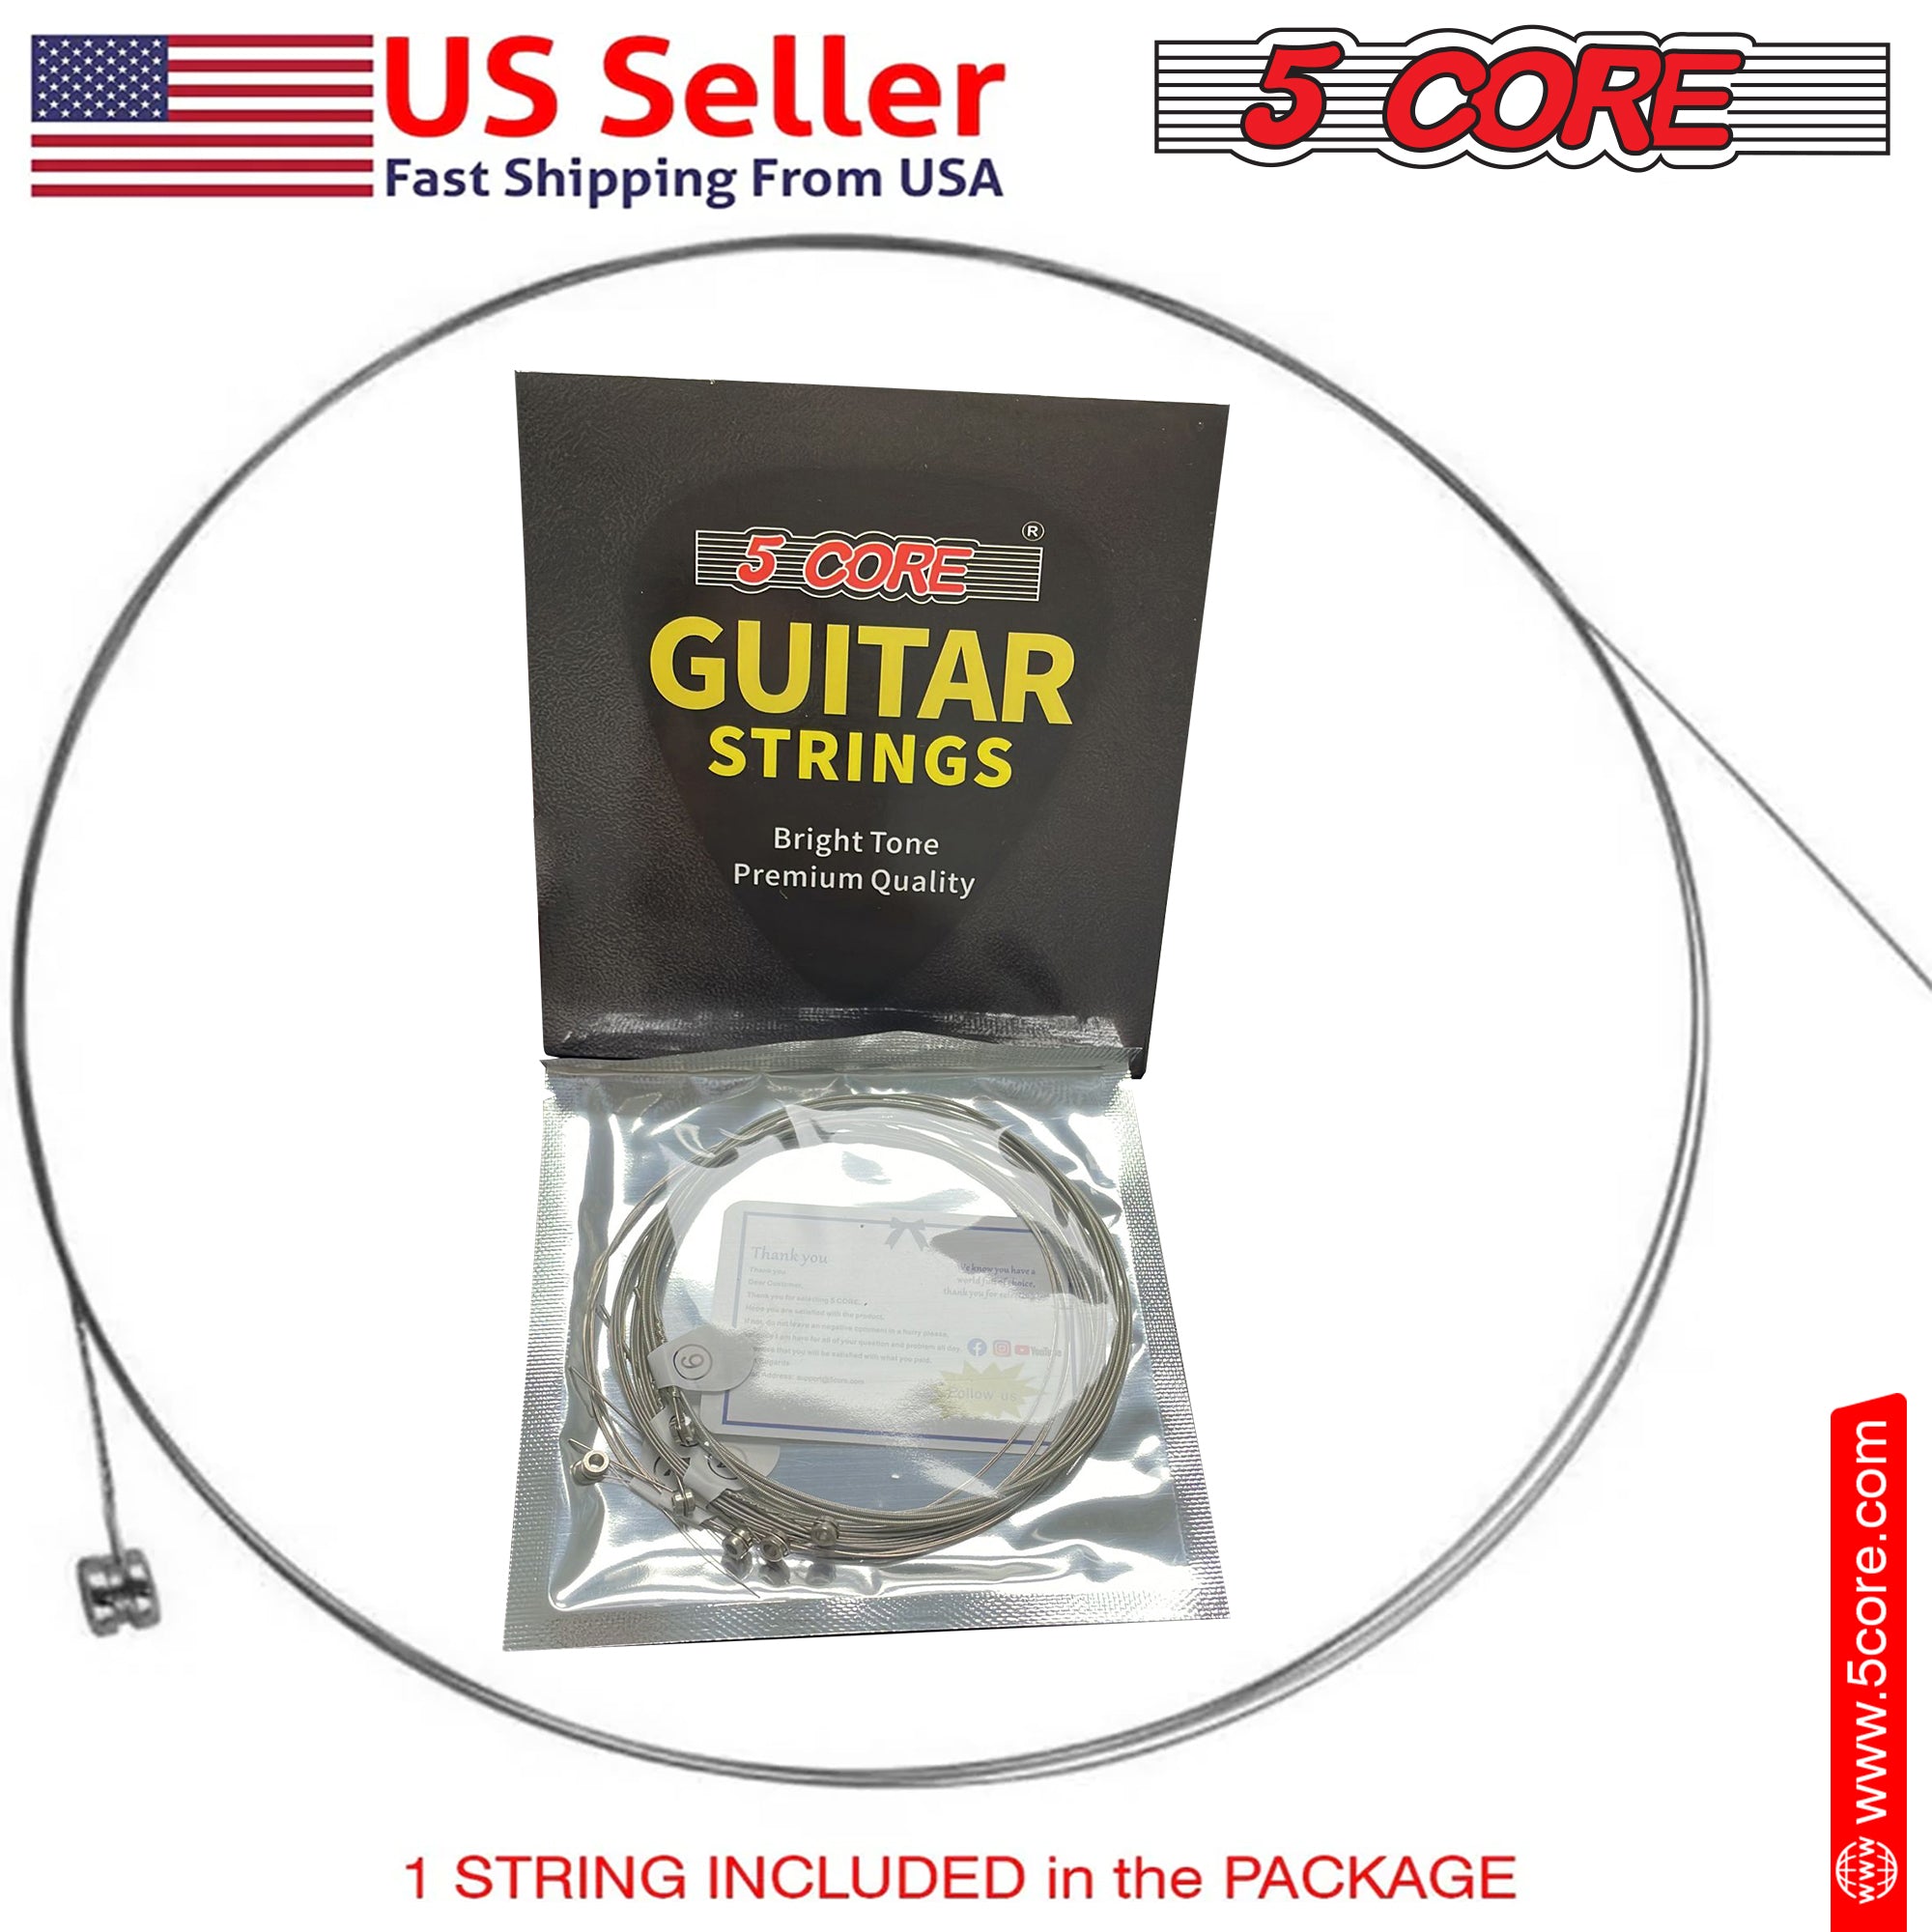 5 Core Electric Guitar Strings • 0.009-.042 Gauge w Deep Bright Tone for 6 String Electric Guitars